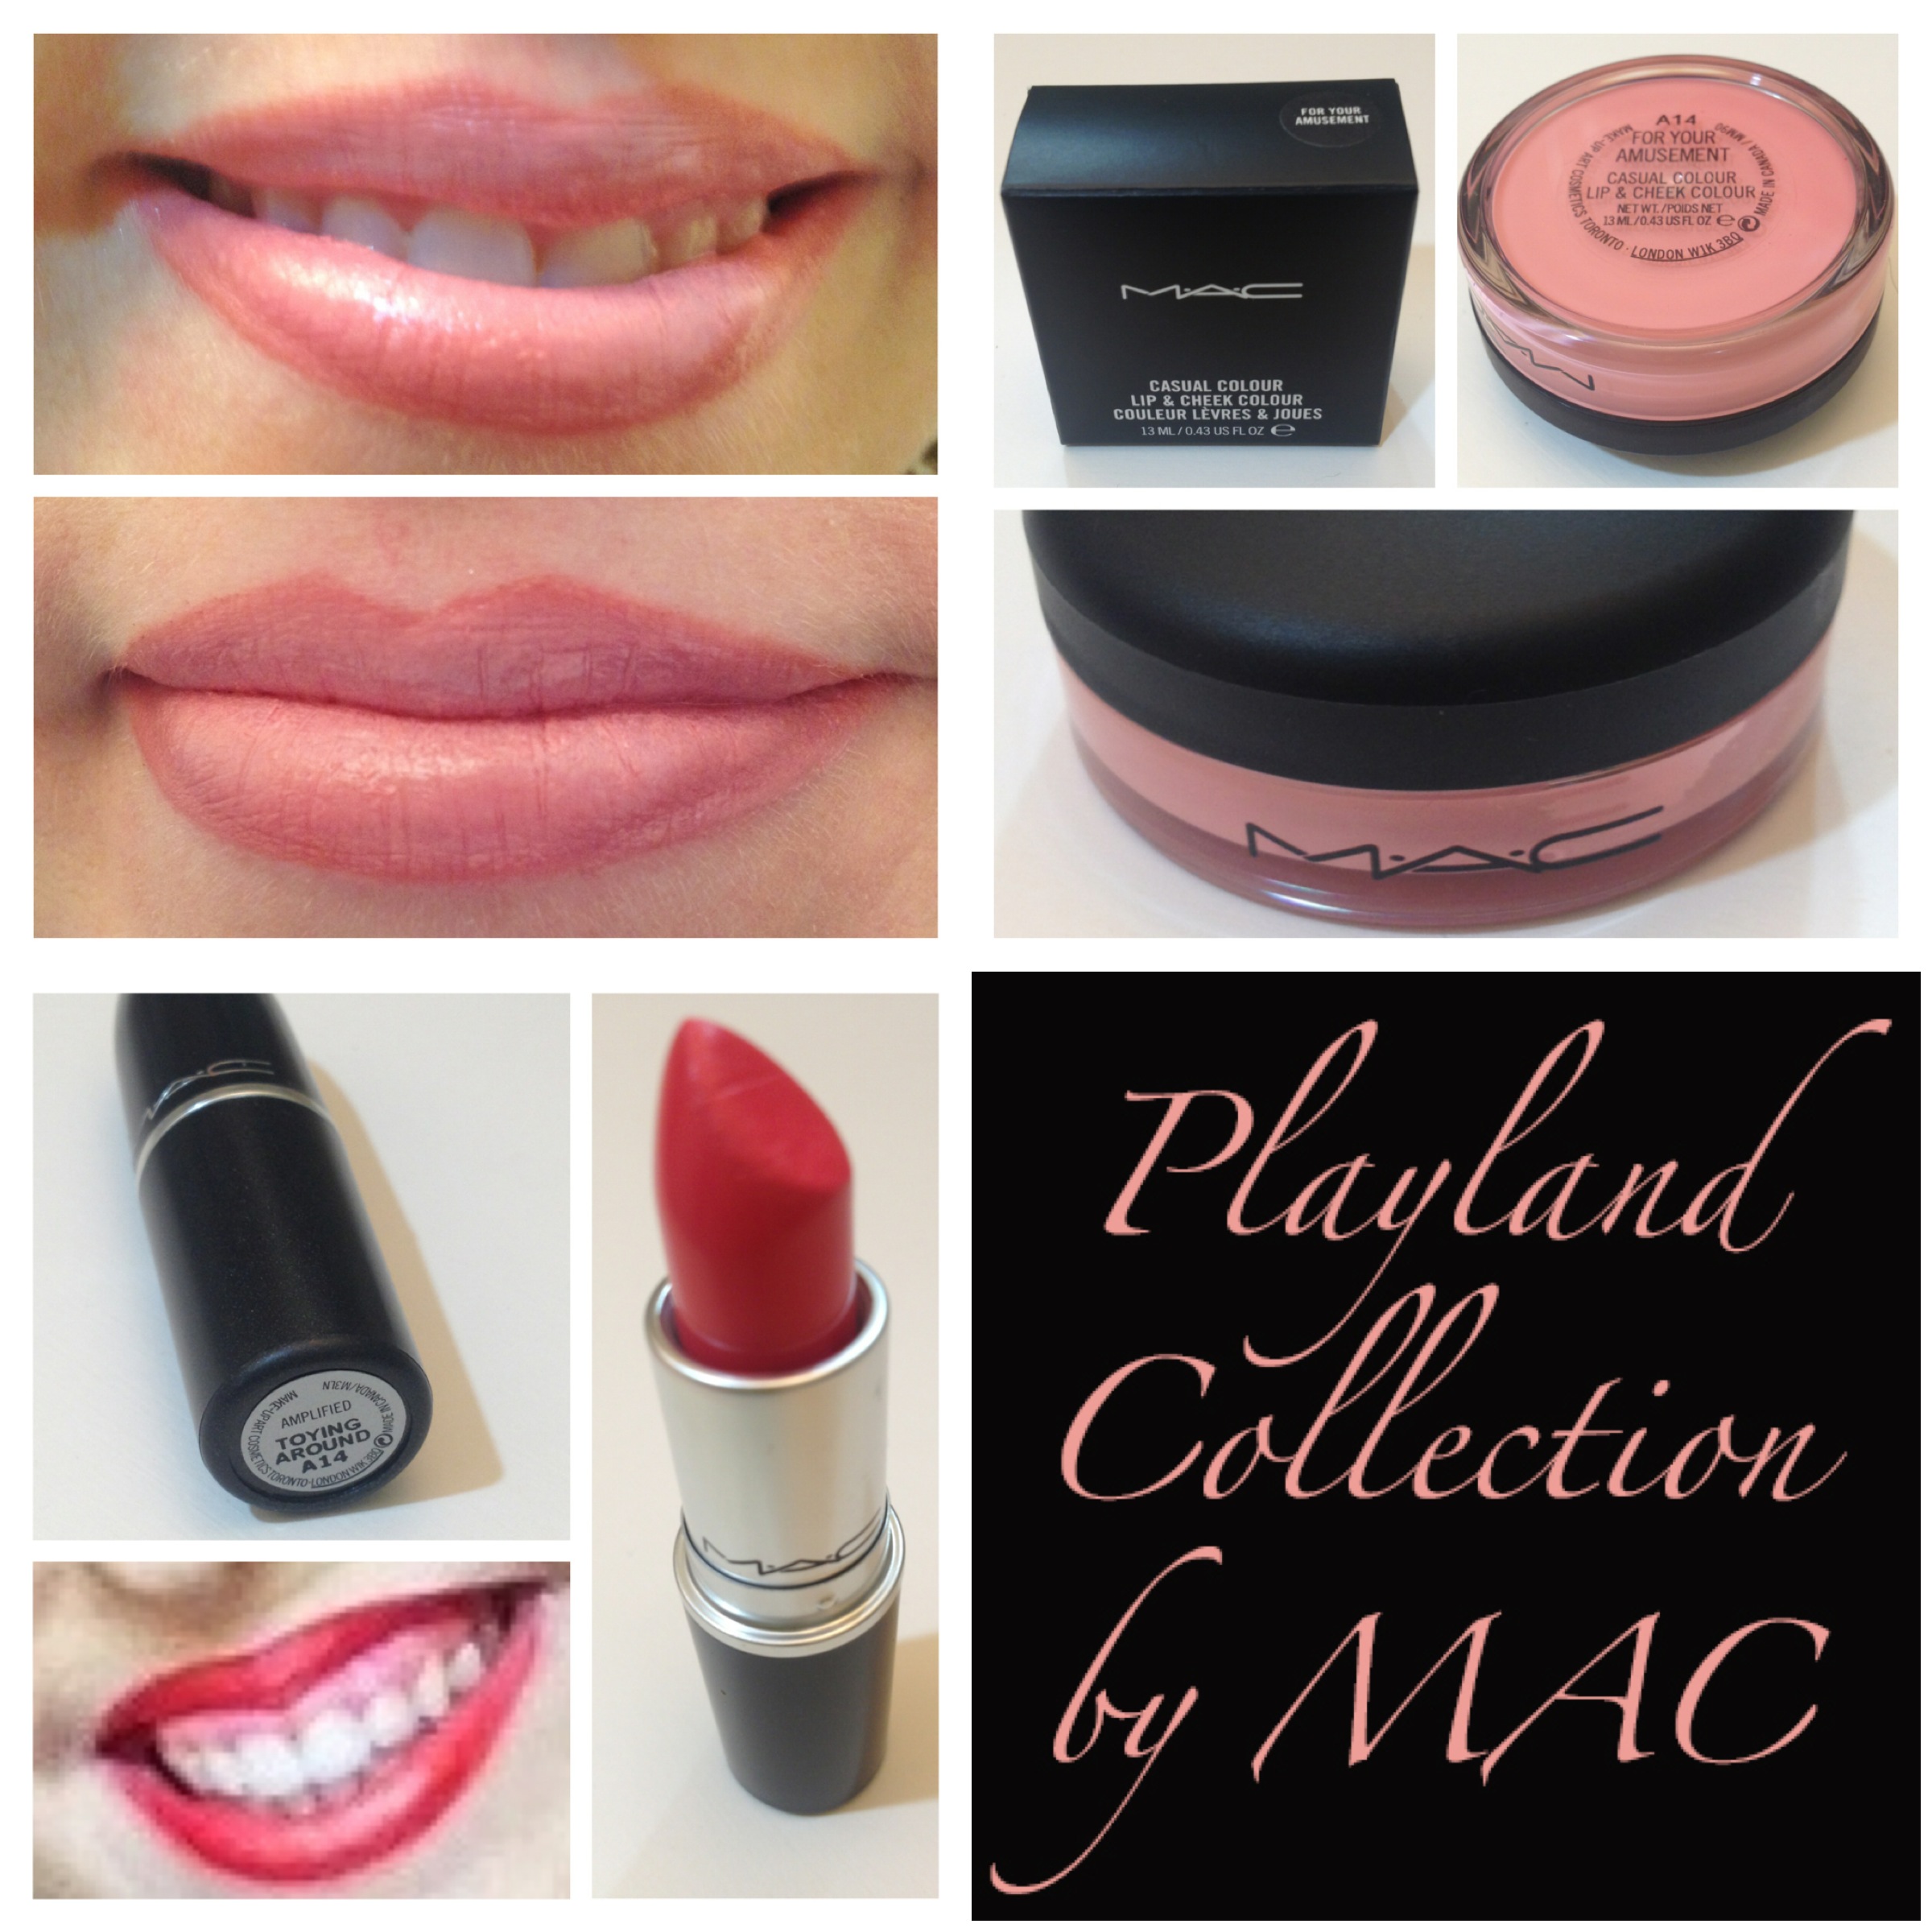 Review of Items from MAC’s Spring Playland Collection